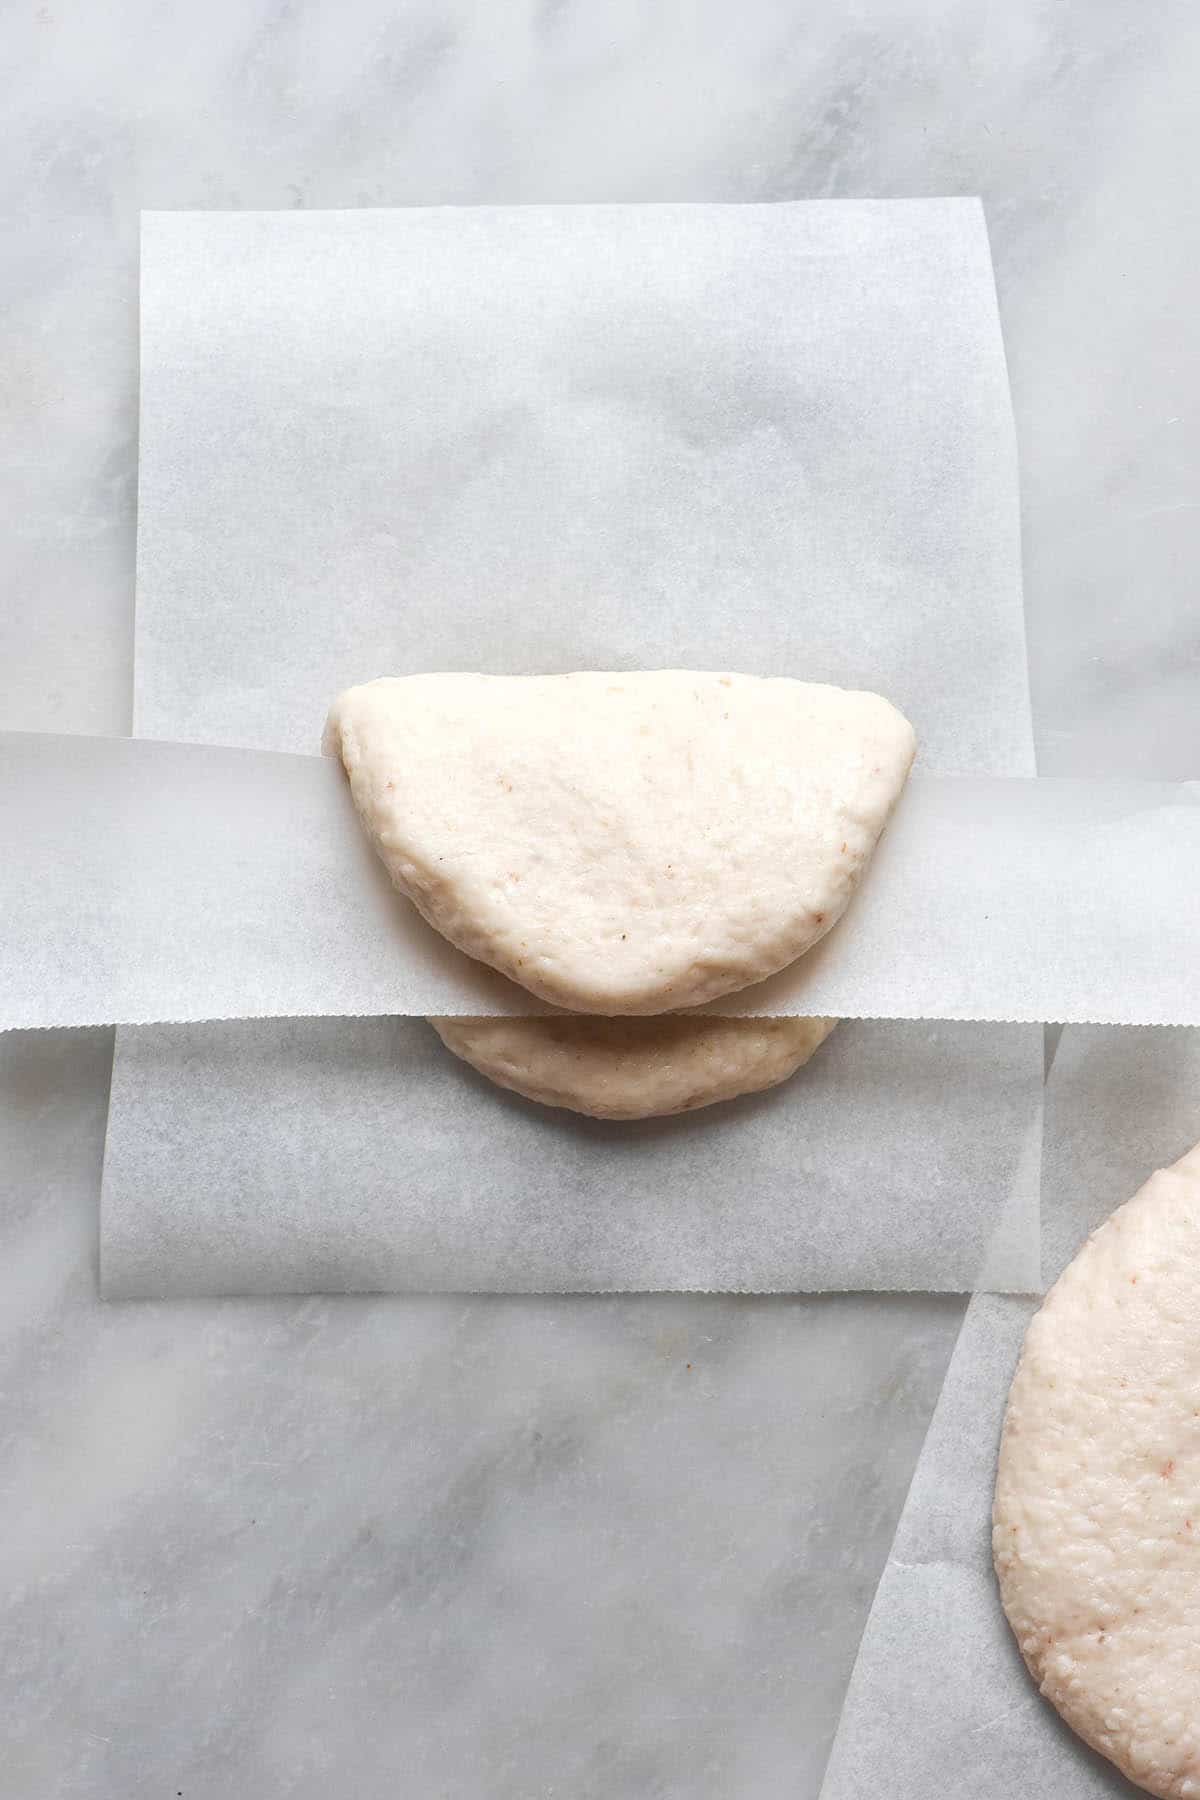 An instructional image regarding how to shape gluten free bao buns. The unshaped buns sit on a white marble table